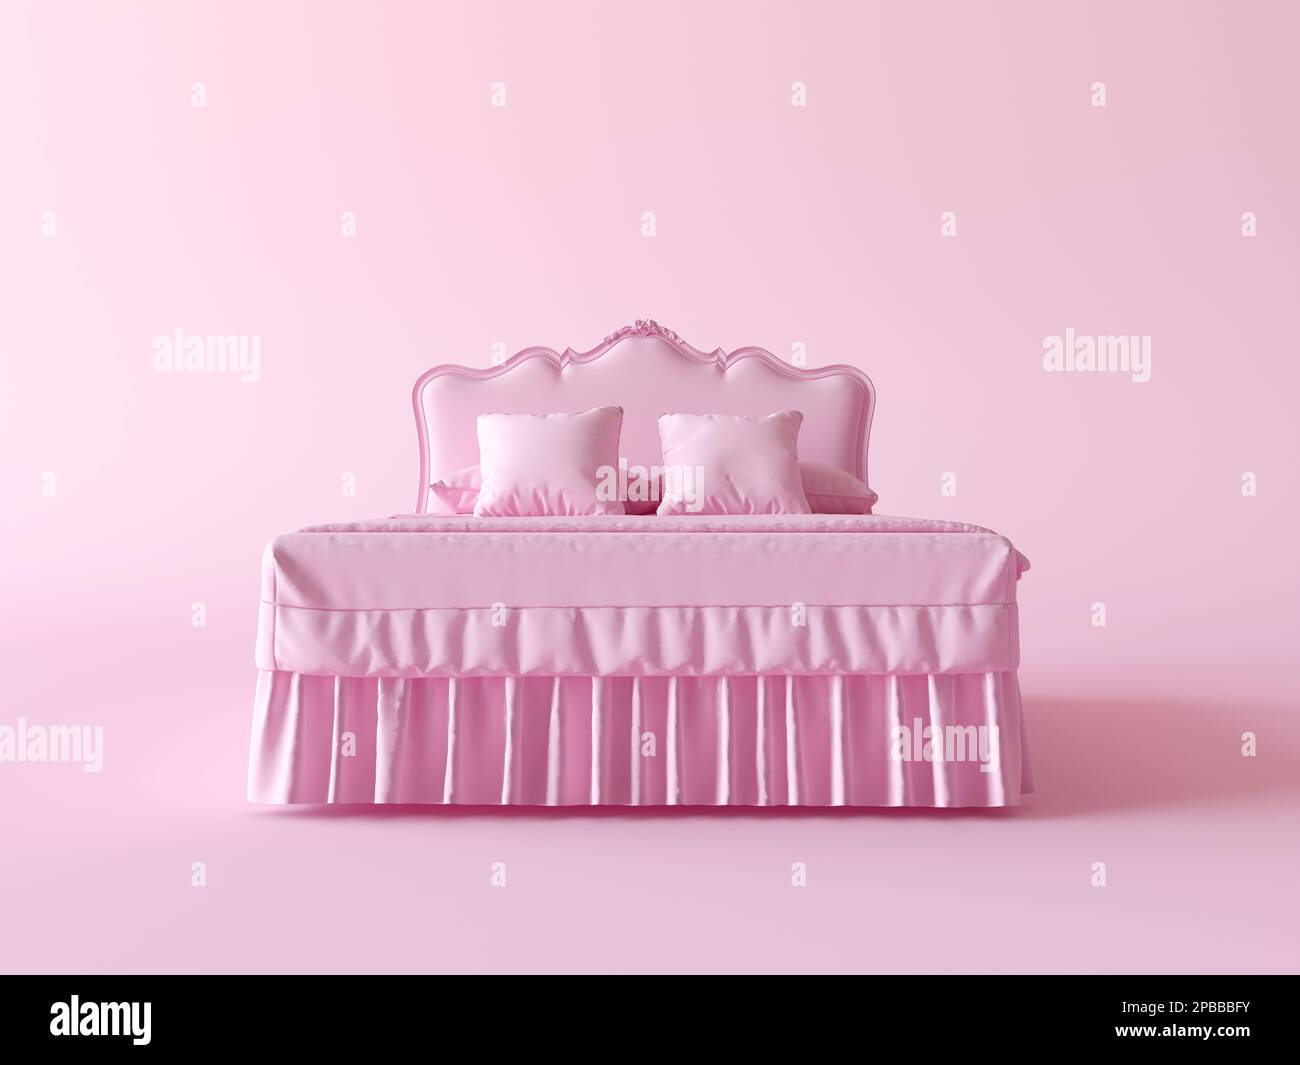 Concept vintage bed pink monochrome composition. Creative minimal paper idea. King size bed model on Light background with copy space. 3d render Stock Photo